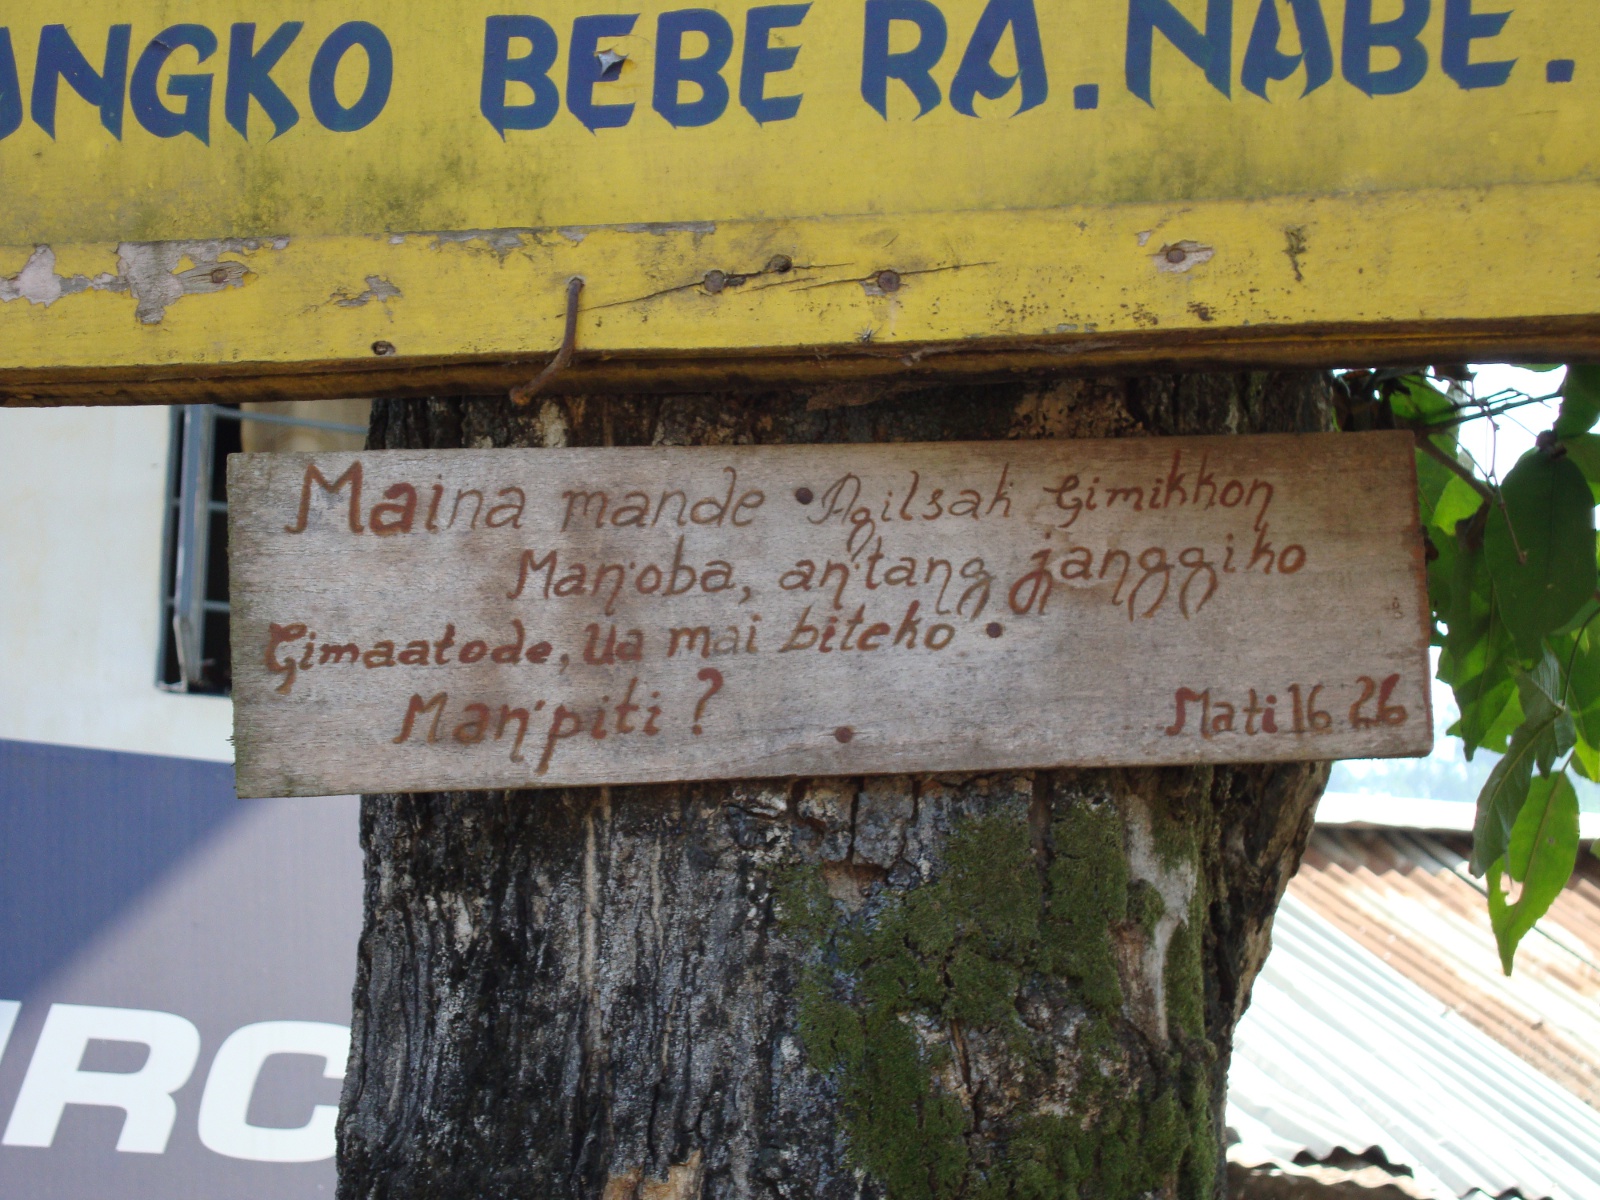 An example of modern written Garo: a Bible verse posted on a tree in Bajengdoba. (The text reads, in KJV: "For what is a man profited, if he shall gain the whole world, and lose his own soul? or what shall a man give in exchange for his soul?" Matthew 16:26.)